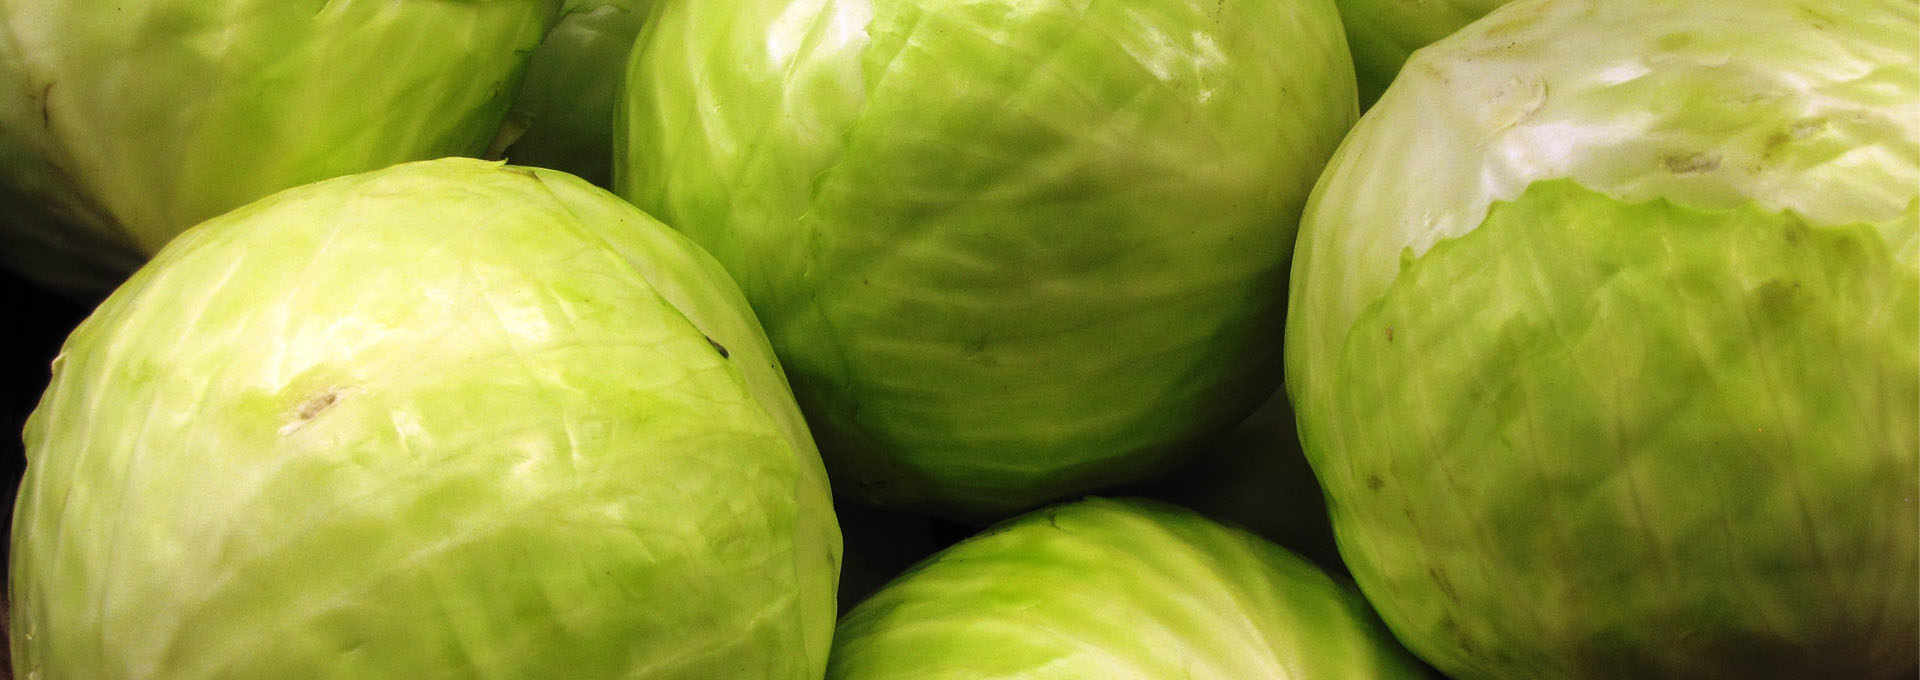 Cabbage and Turnip: Healthy, Nutritious and Delicious